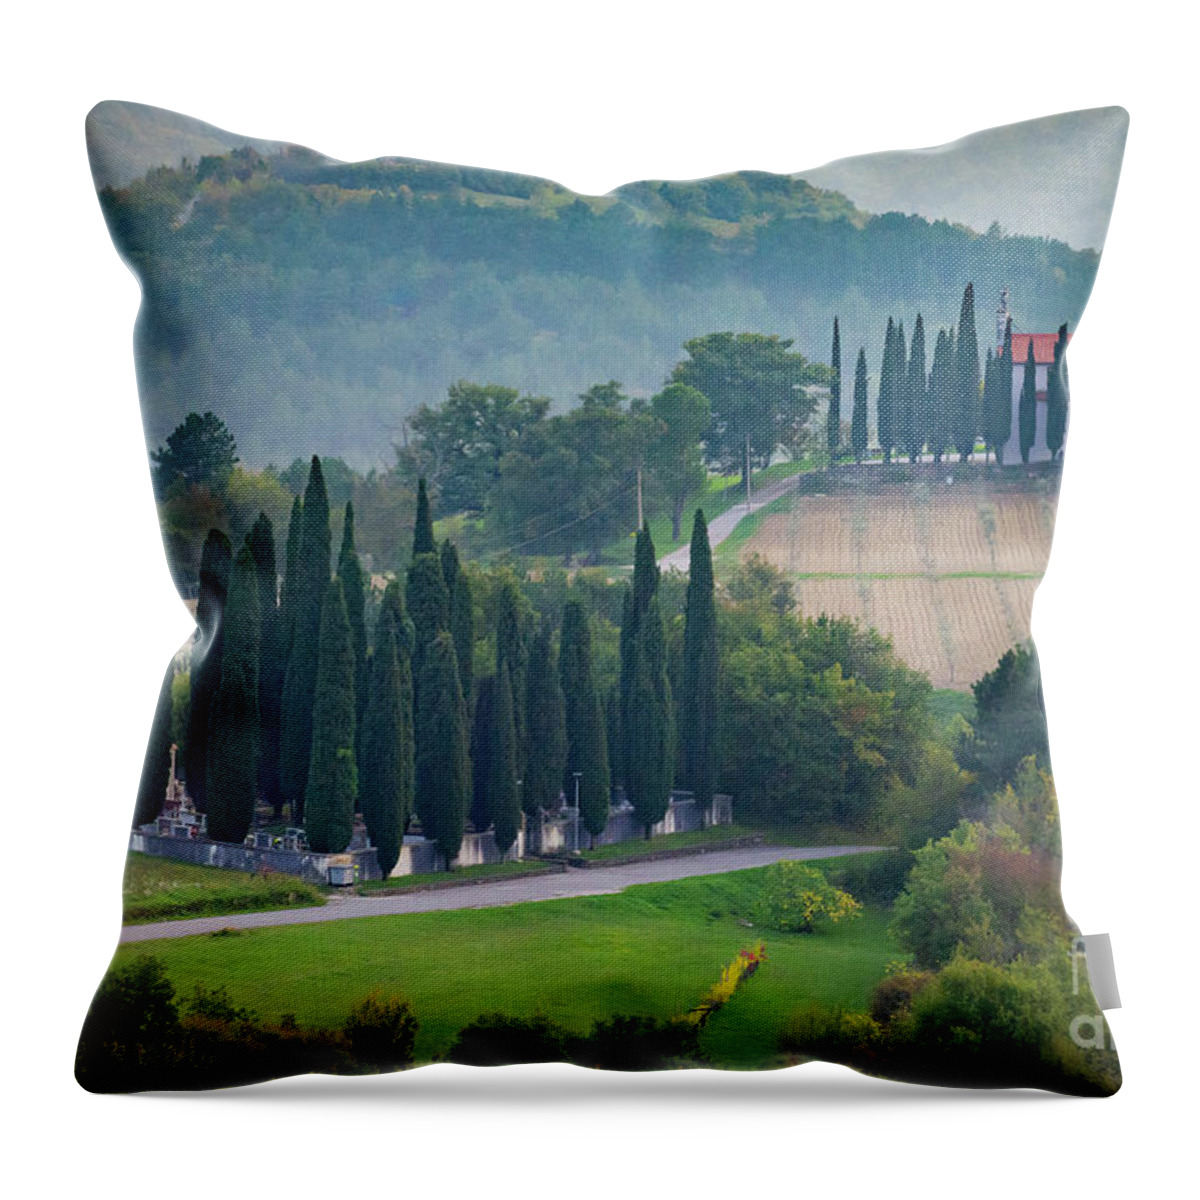 Landscape Throw Pillow featuring the photograph Slovenia by Barry Bohn